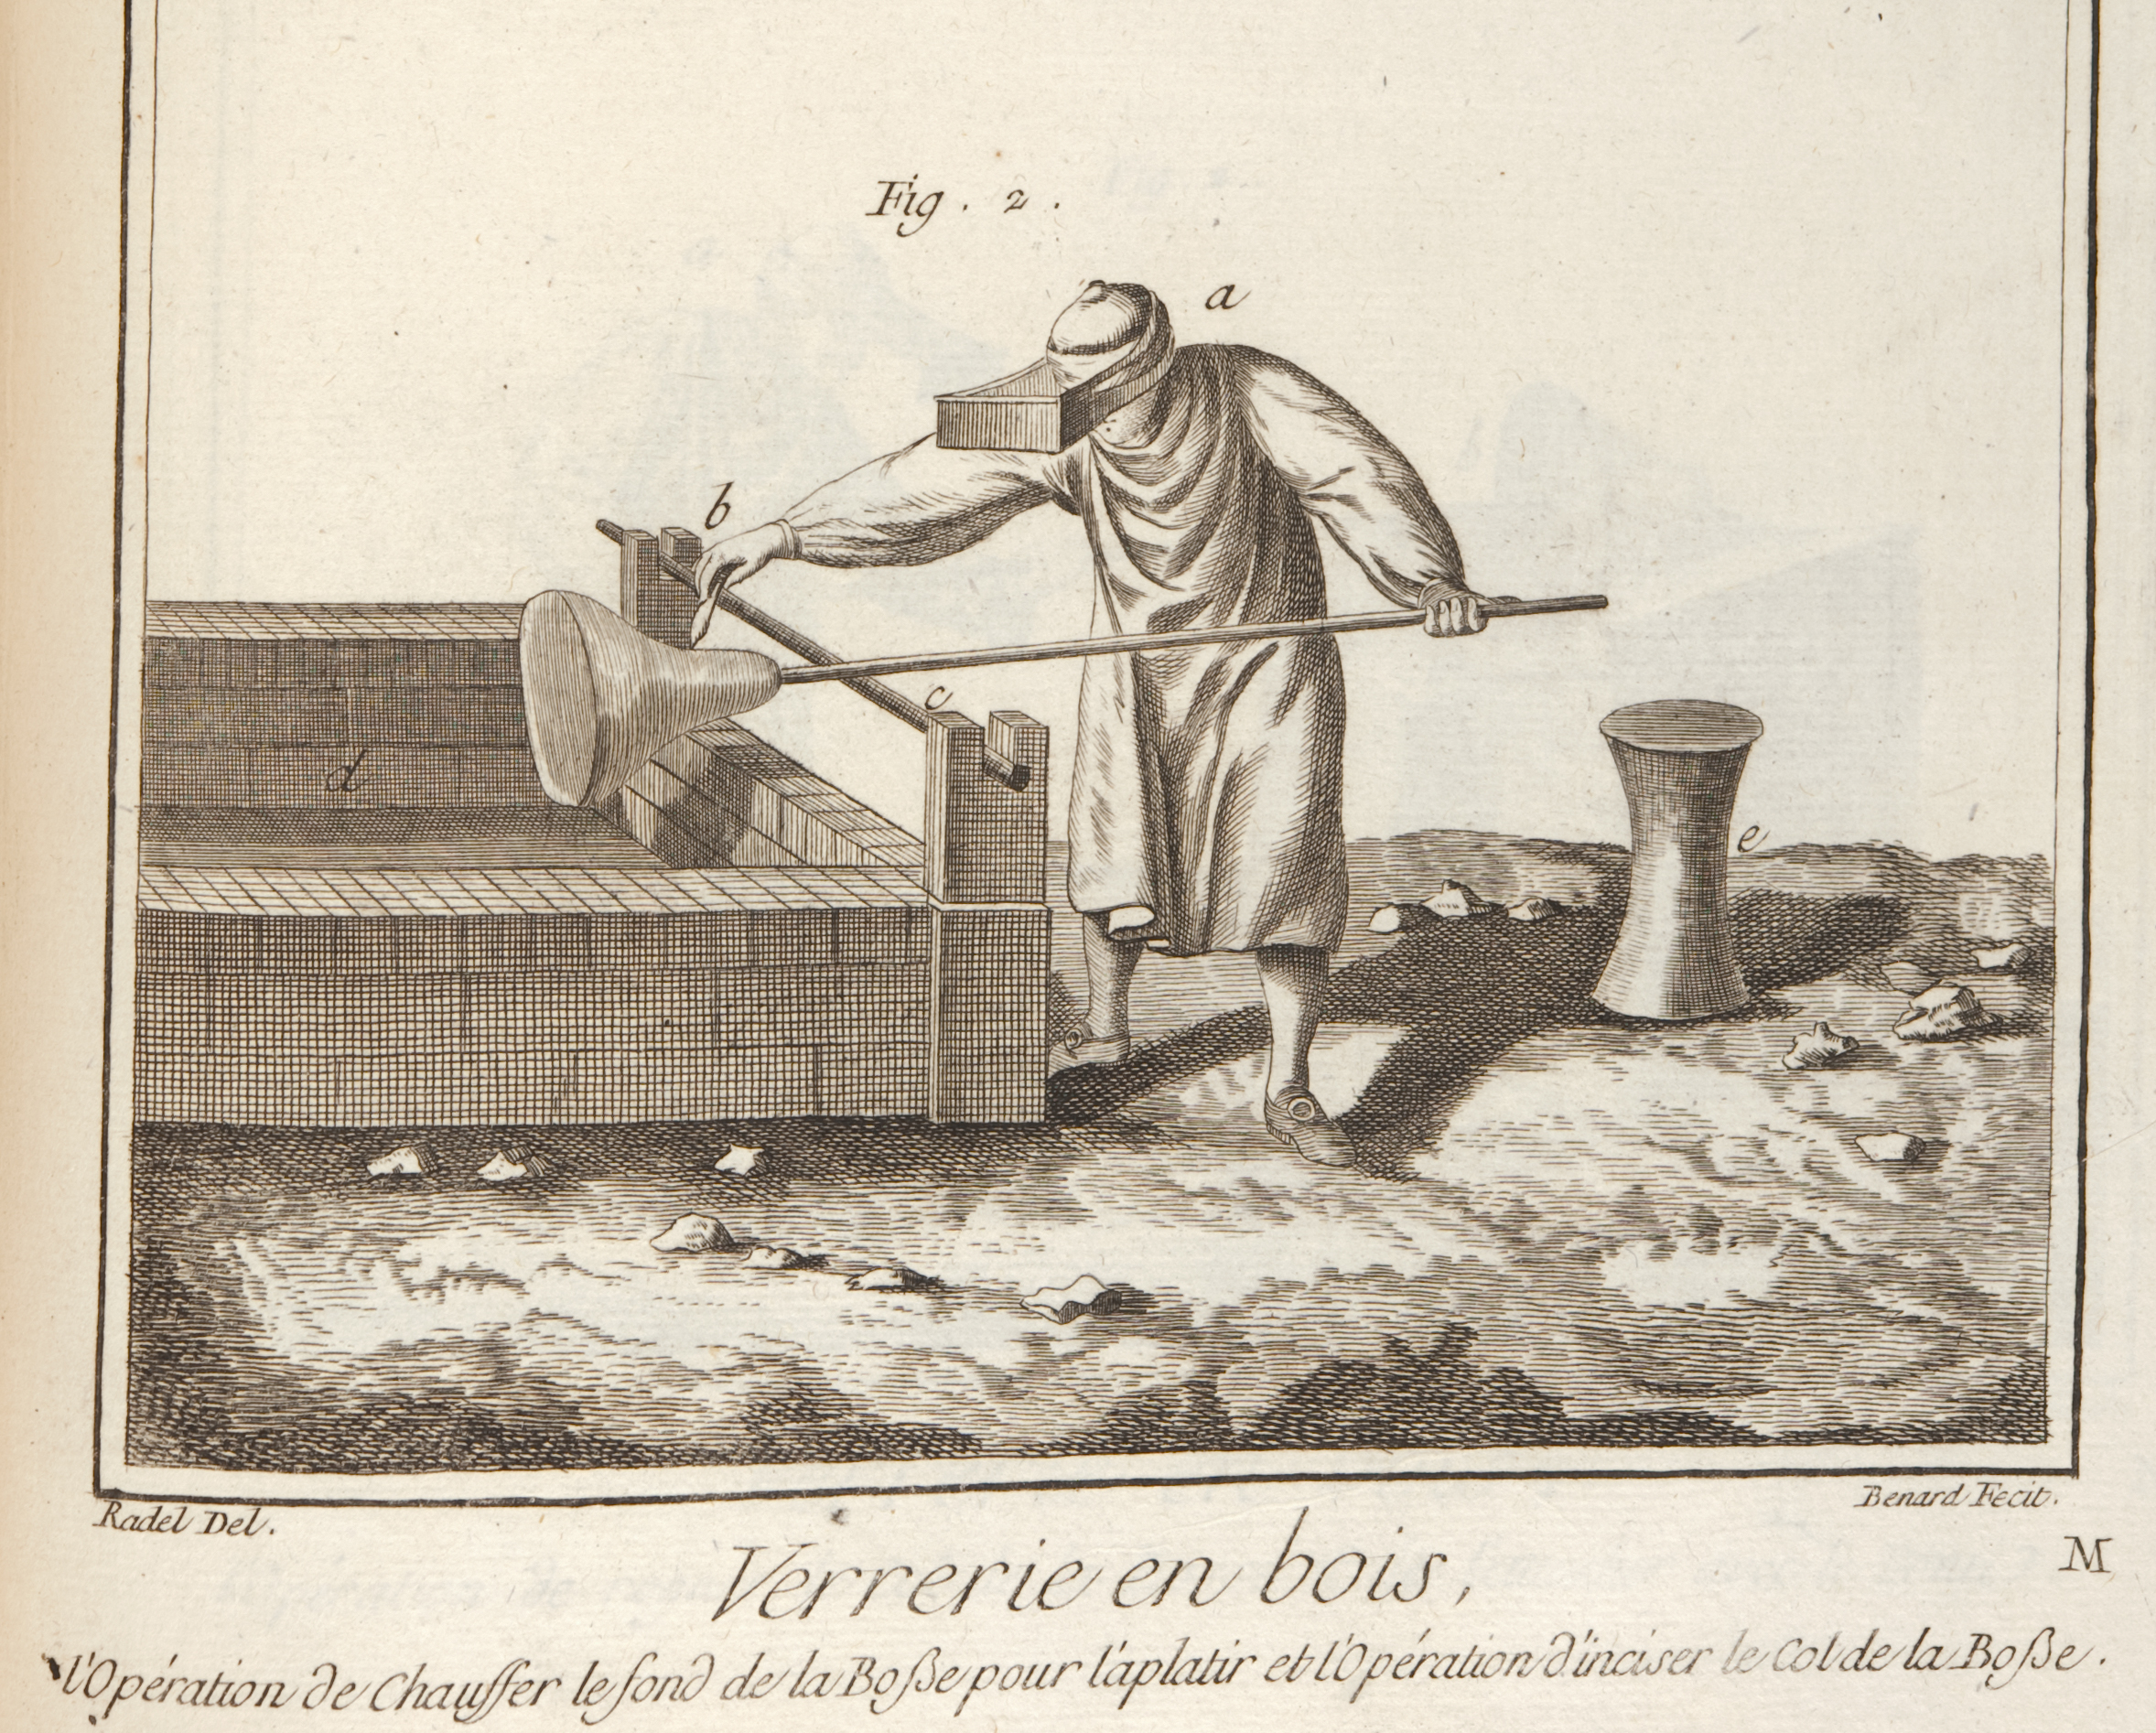 Plate depicting "Verrerie en bois" (glass making) from Diderot & d’Alembert’s Encyclopédie (St Andrews copy at =sf AE25.D5)